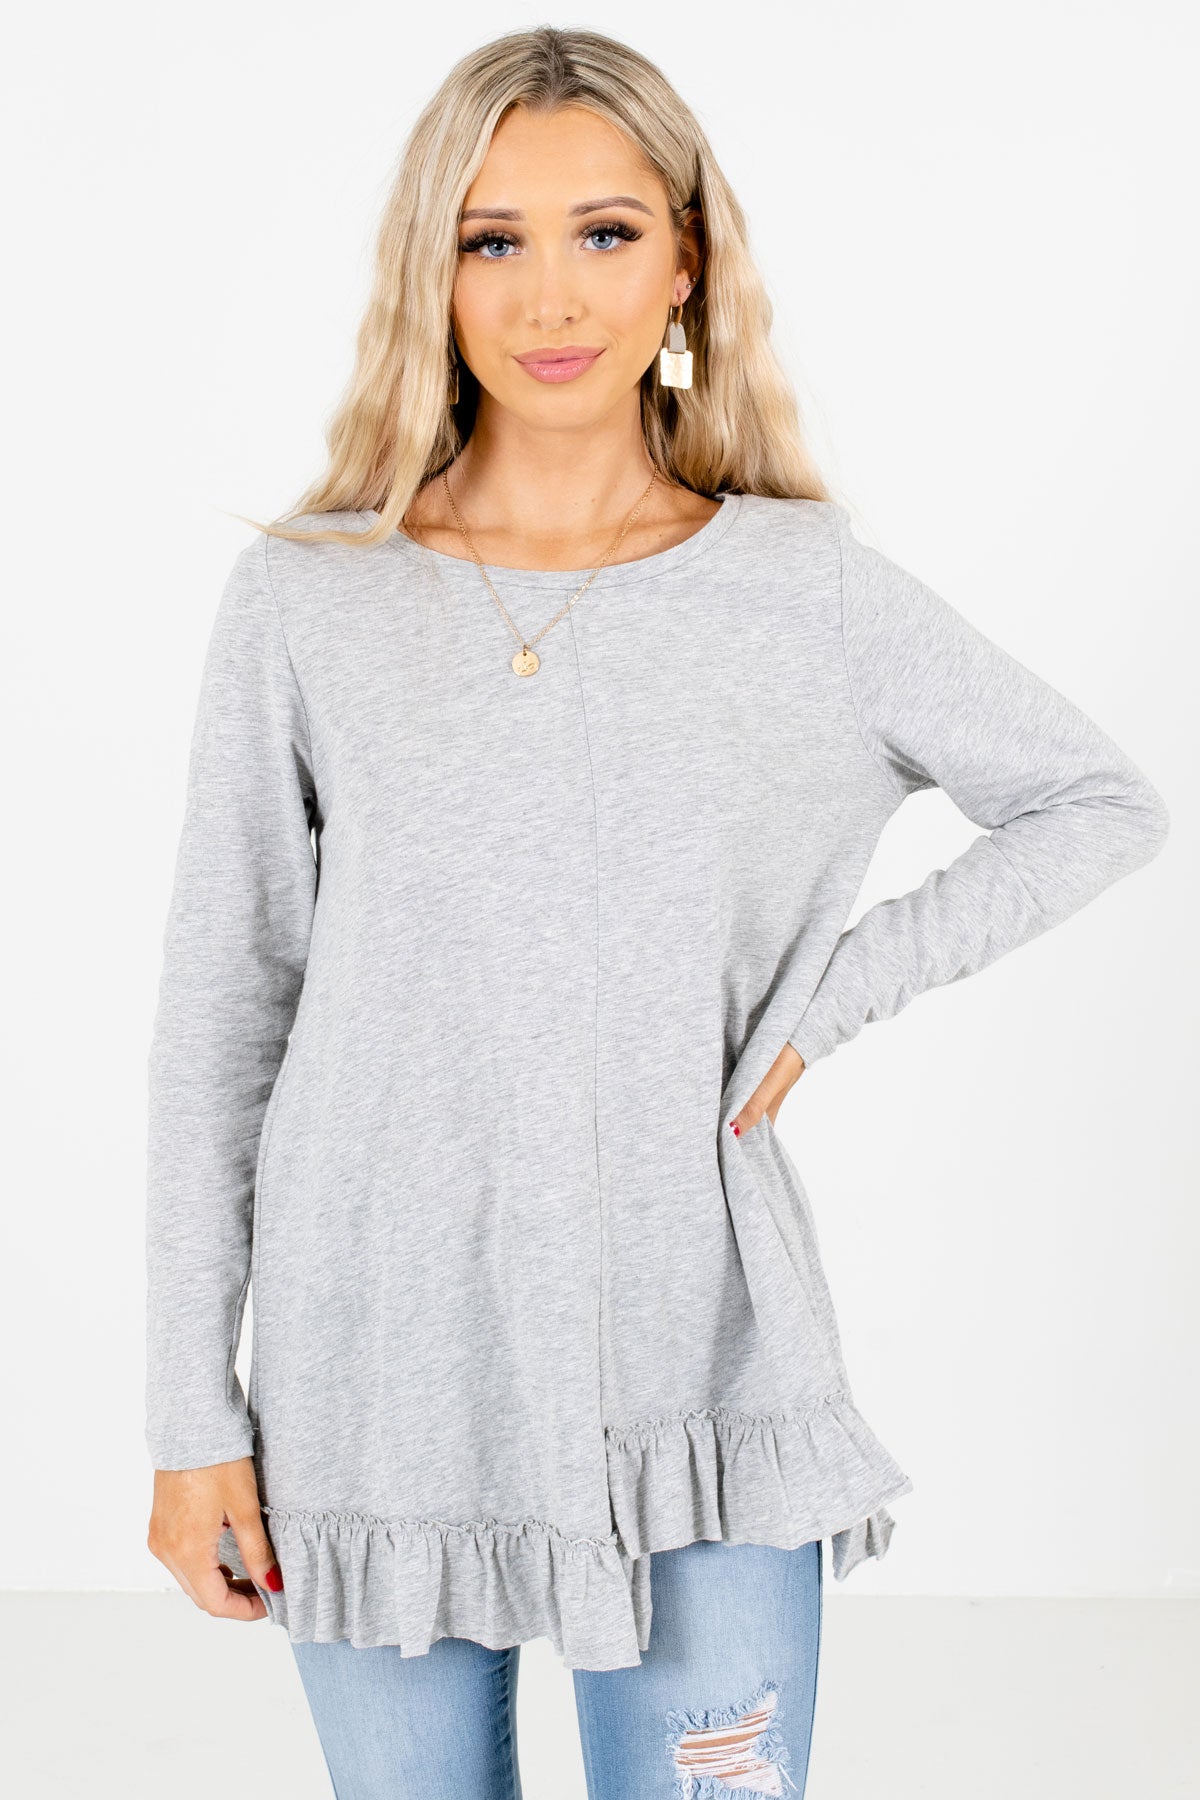 Women's Heather Gray Spring and Summer Boutique Tops